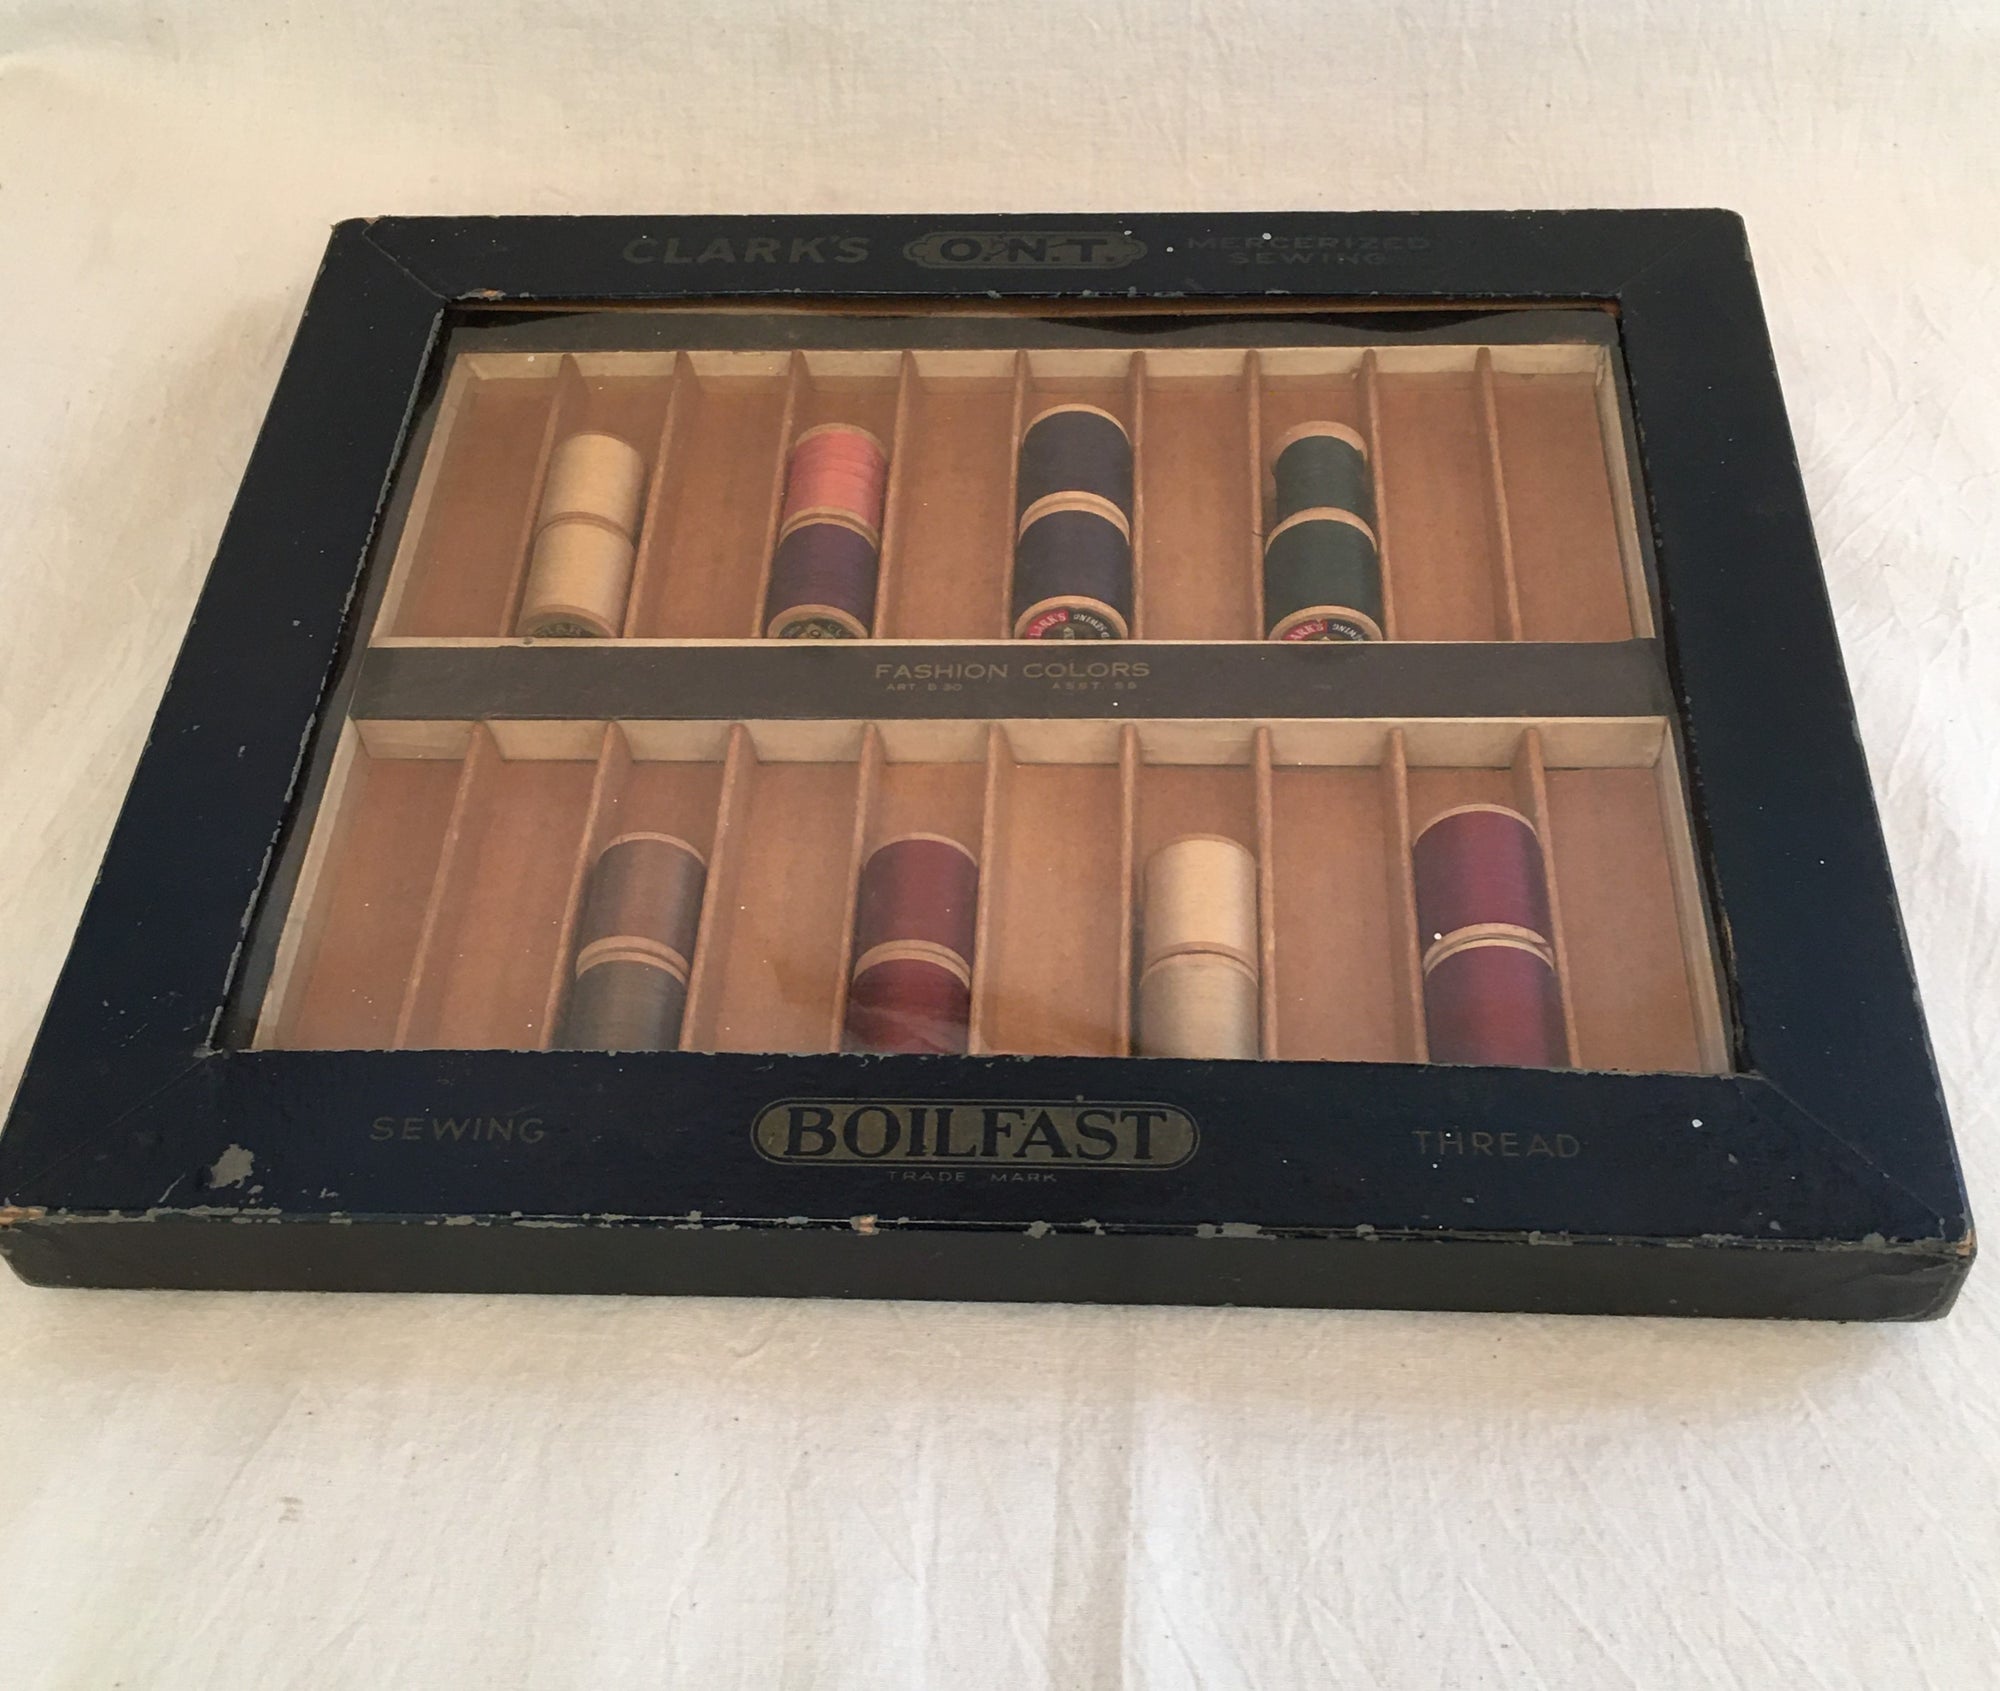 1940s Clark’s O.N.T. Boilfast Sewing Thread Heavy Paperboard Store Display Case